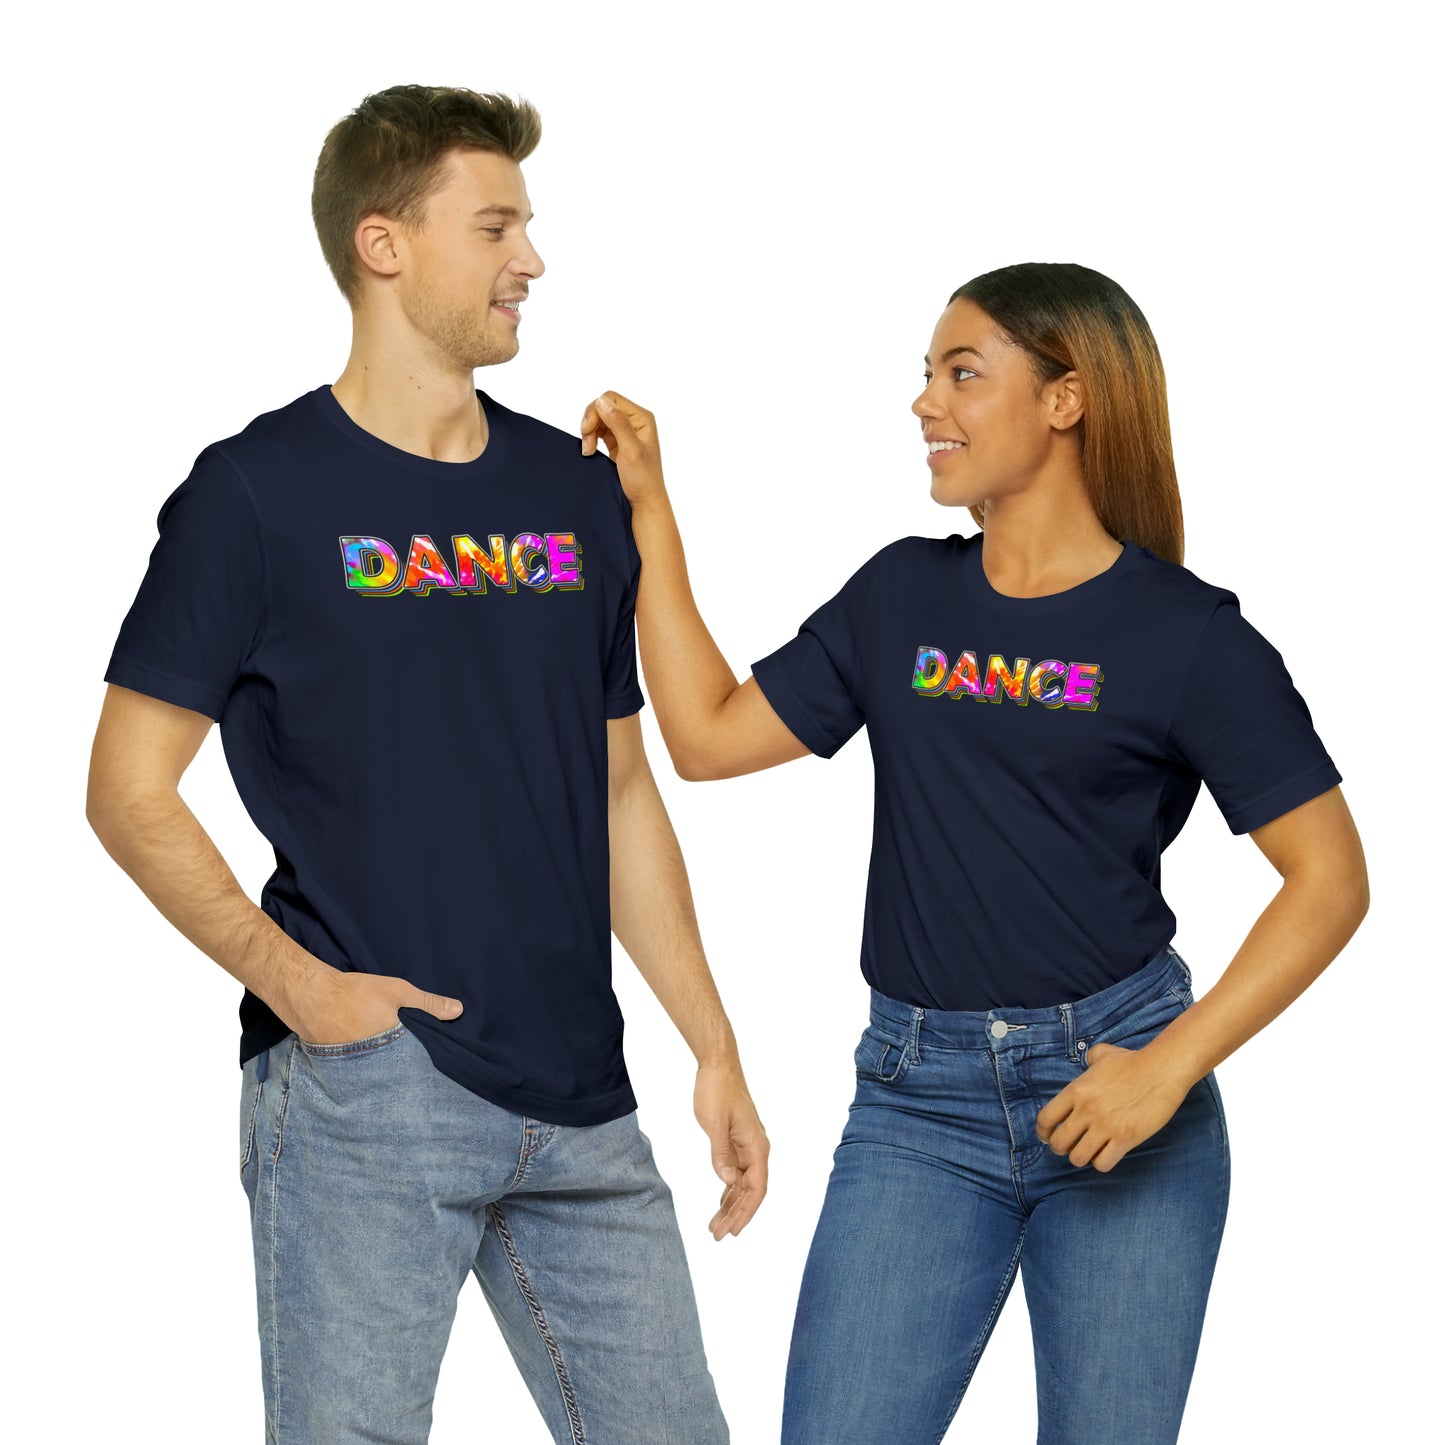 DANCE - Wicked Naughty Apparel